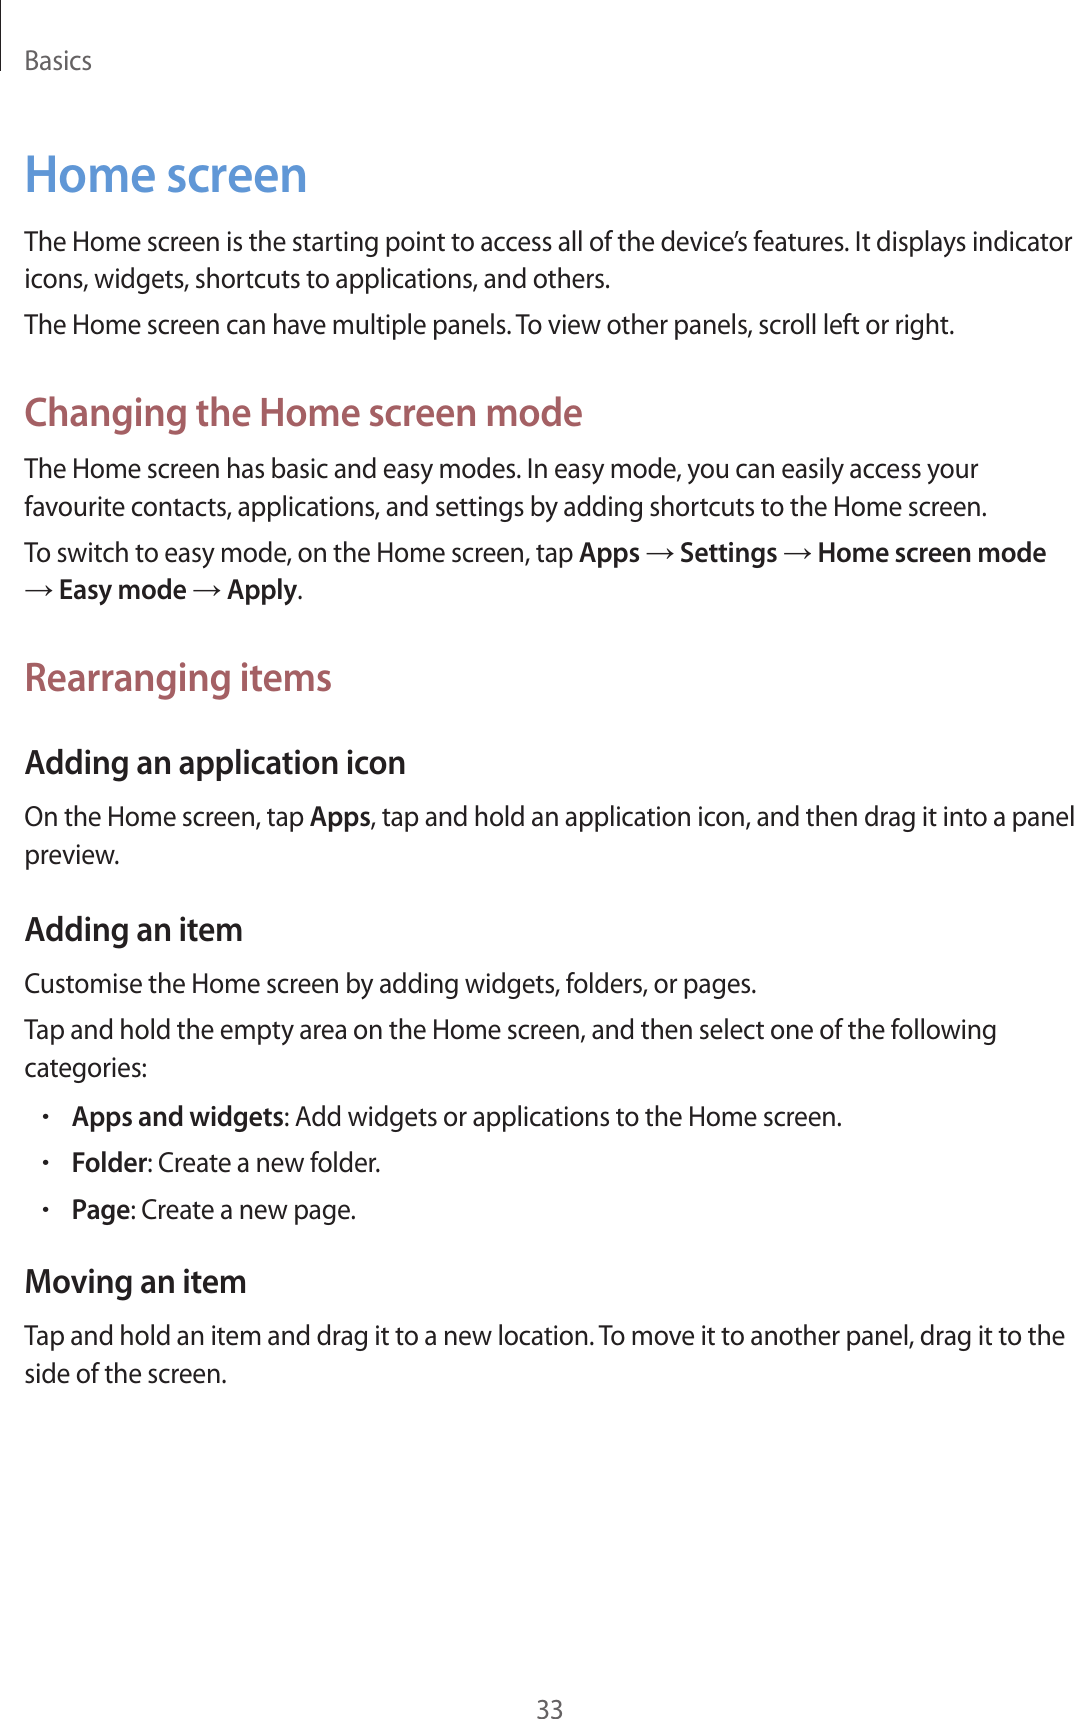 Basics33Home screenThe Home screen is the starting point to access all of the device’s features. It displays indicator icons, widgets, shortcuts to applications, and others.The Home screen can have multiple panels. To view other panels, scroll left or right.Changing the Home screen modeThe Home screen has basic and easy modes. In easy mode, you can easily access your favourite contacts, applications, and settings by adding shortcuts to the Home screen.To switch to easy mode, on the Home screen, tap Apps → Settings → Home screen mode → Easy mode → Apply.Rearranging itemsAdding an application iconOn the Home screen, tap Apps, tap and hold an application icon, and then drag it into a panel preview.Adding an itemCustomise the Home screen by adding widgets, folders, or pages.Tap and hold the empty area on the Home screen, and then select one of the following categories:•Apps and widgets: Add widgets or applications to the Home screen.•Folder: Create a new folder.•Page: Create a new page.Moving an itemTap and hold an item and drag it to a new location. To move it to another panel, drag it to the side of the screen.